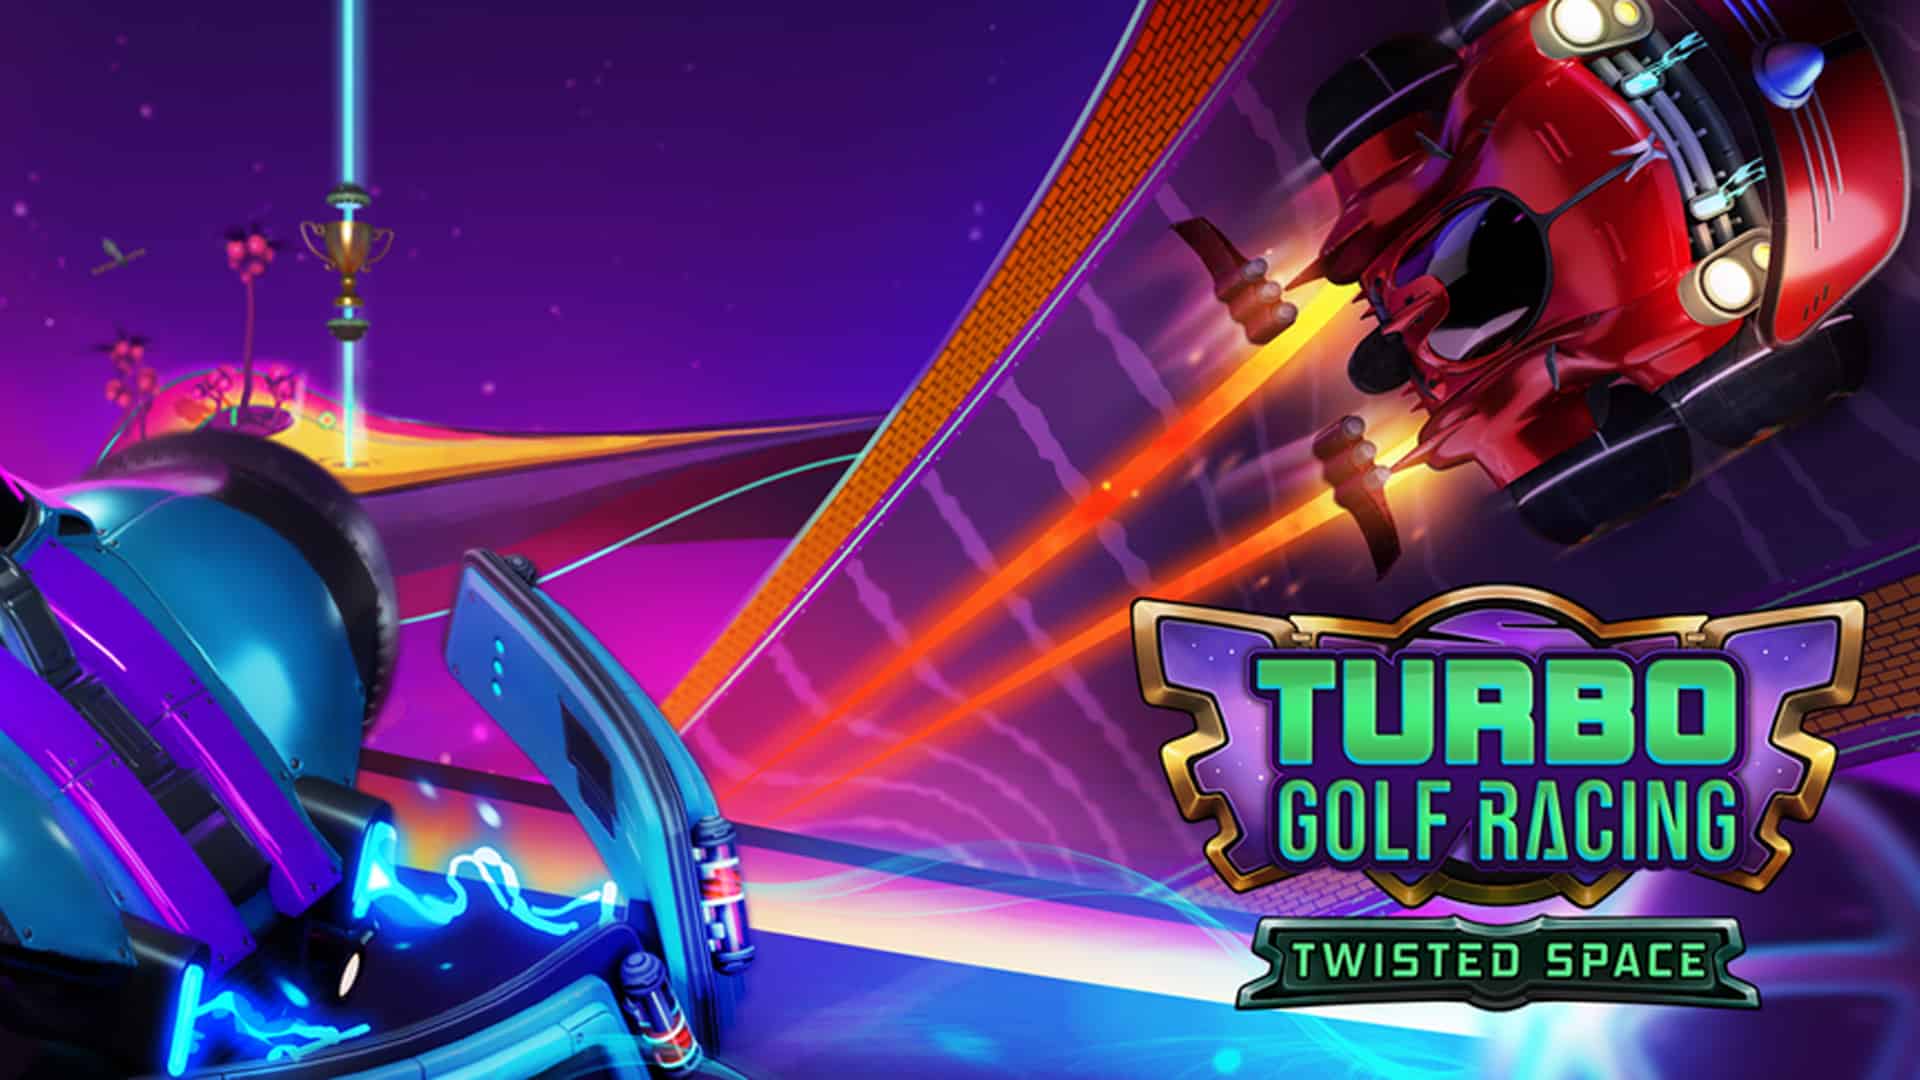 Turbo Golf Racing Gears Up For Launch on Game Preview and Xbox Game Pass